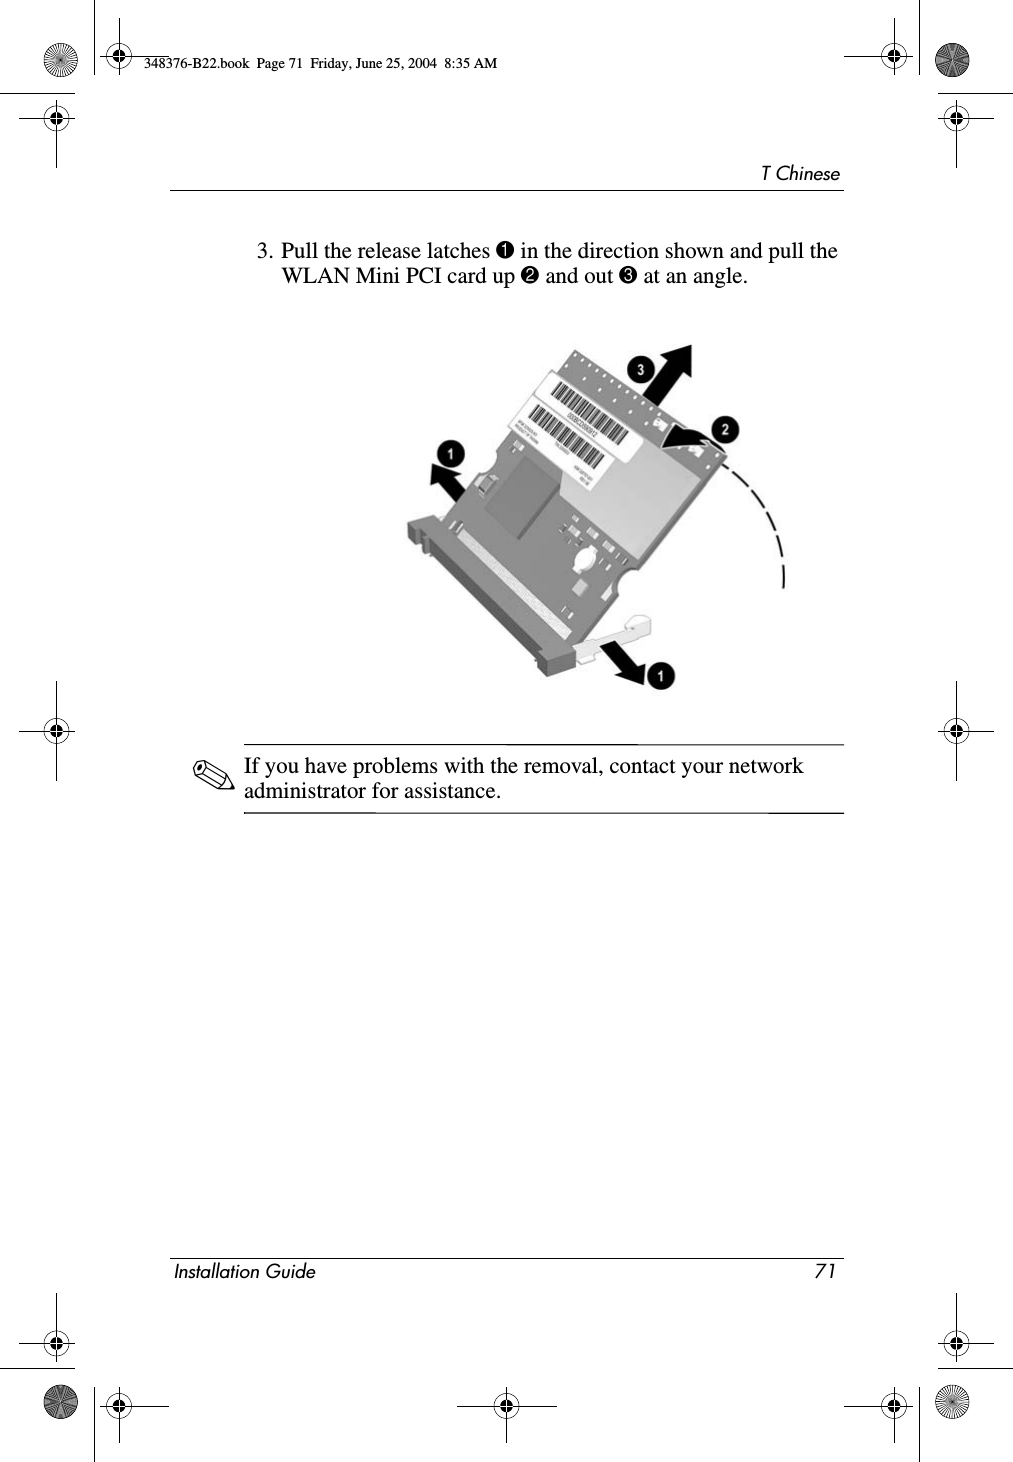 T ChineseInstallation Guide 713. Pull the release latches 1 in the direction shown and pull the WLAN Mini PCI card up 2 and out 3 at an angle.✎If you have problems with the removal, contact your network administrator for assistance.348376-B22.book  Page 71  Friday, June 25, 2004  8:35 AM